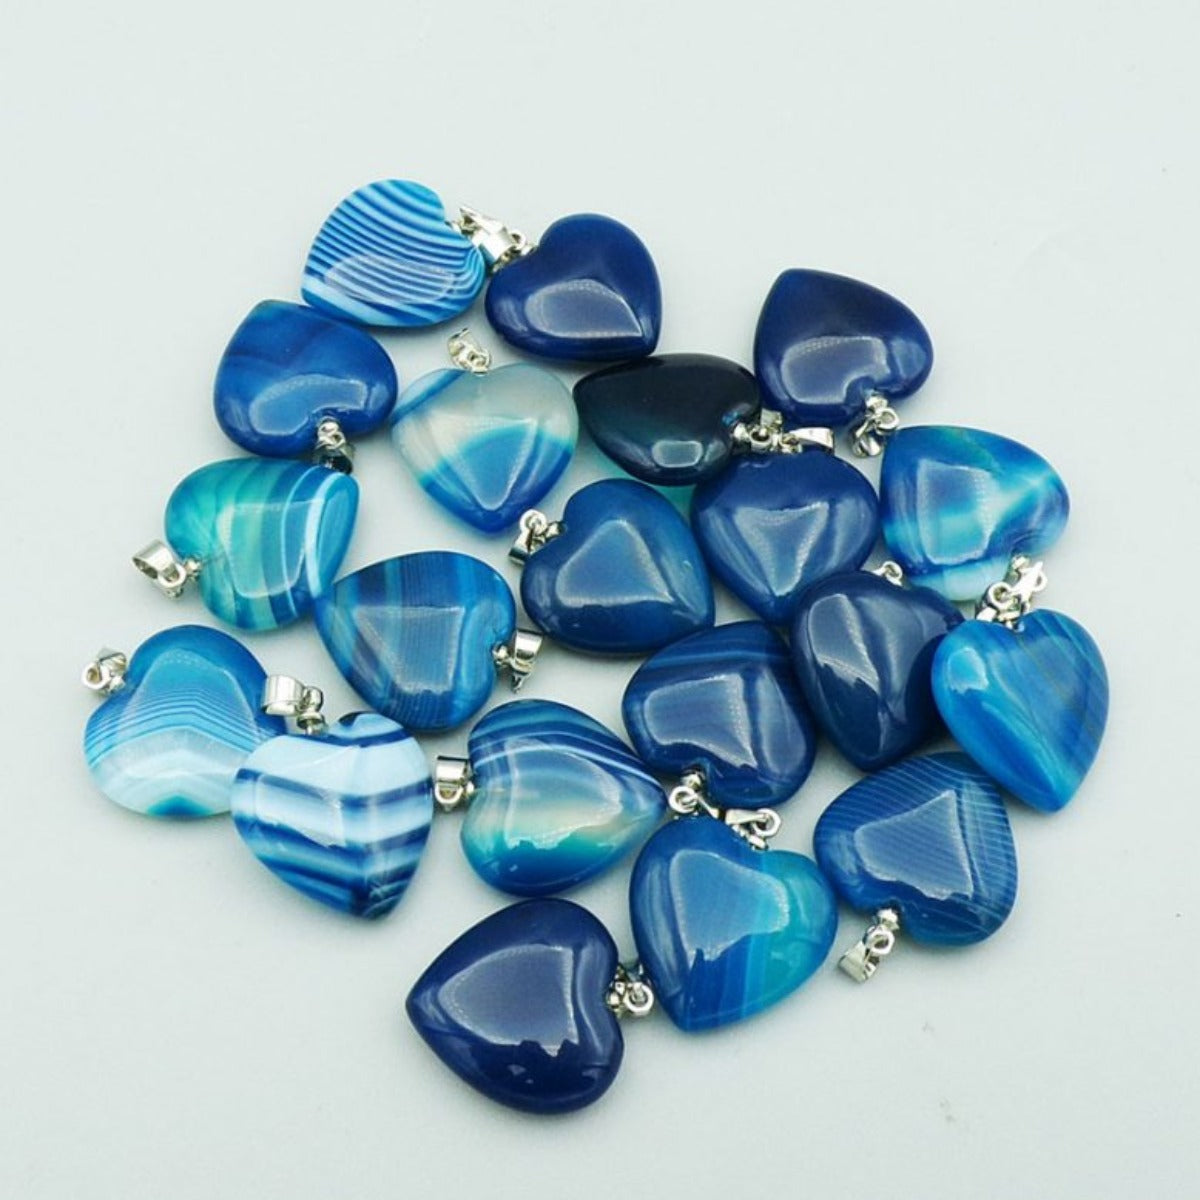 Blue Banded Agate Crystal Heart Pendant Necklace - Exquisite Crystals